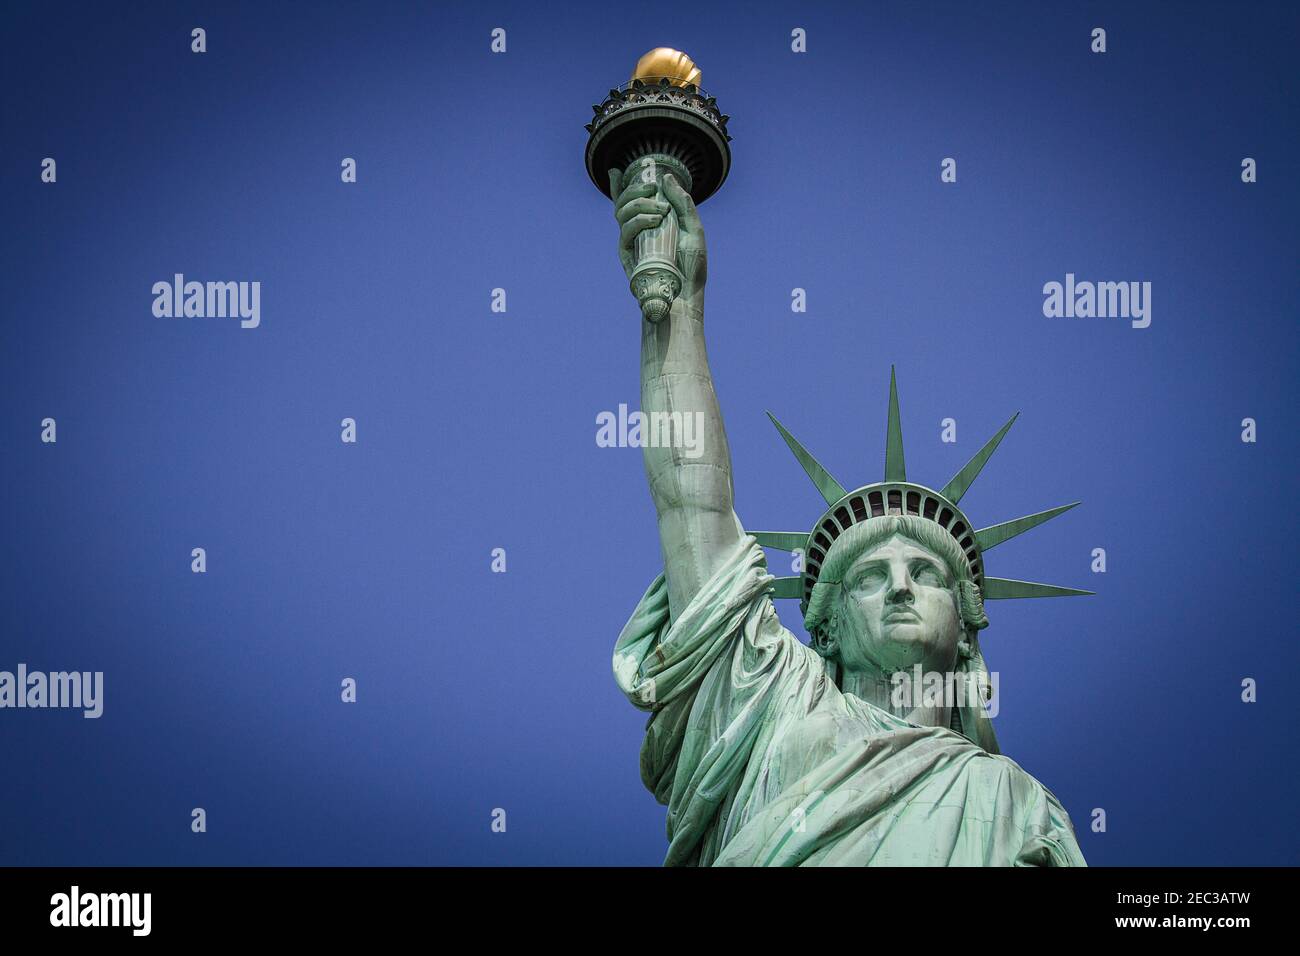 A close up image of the Statue of Liberty front side Stock Photo